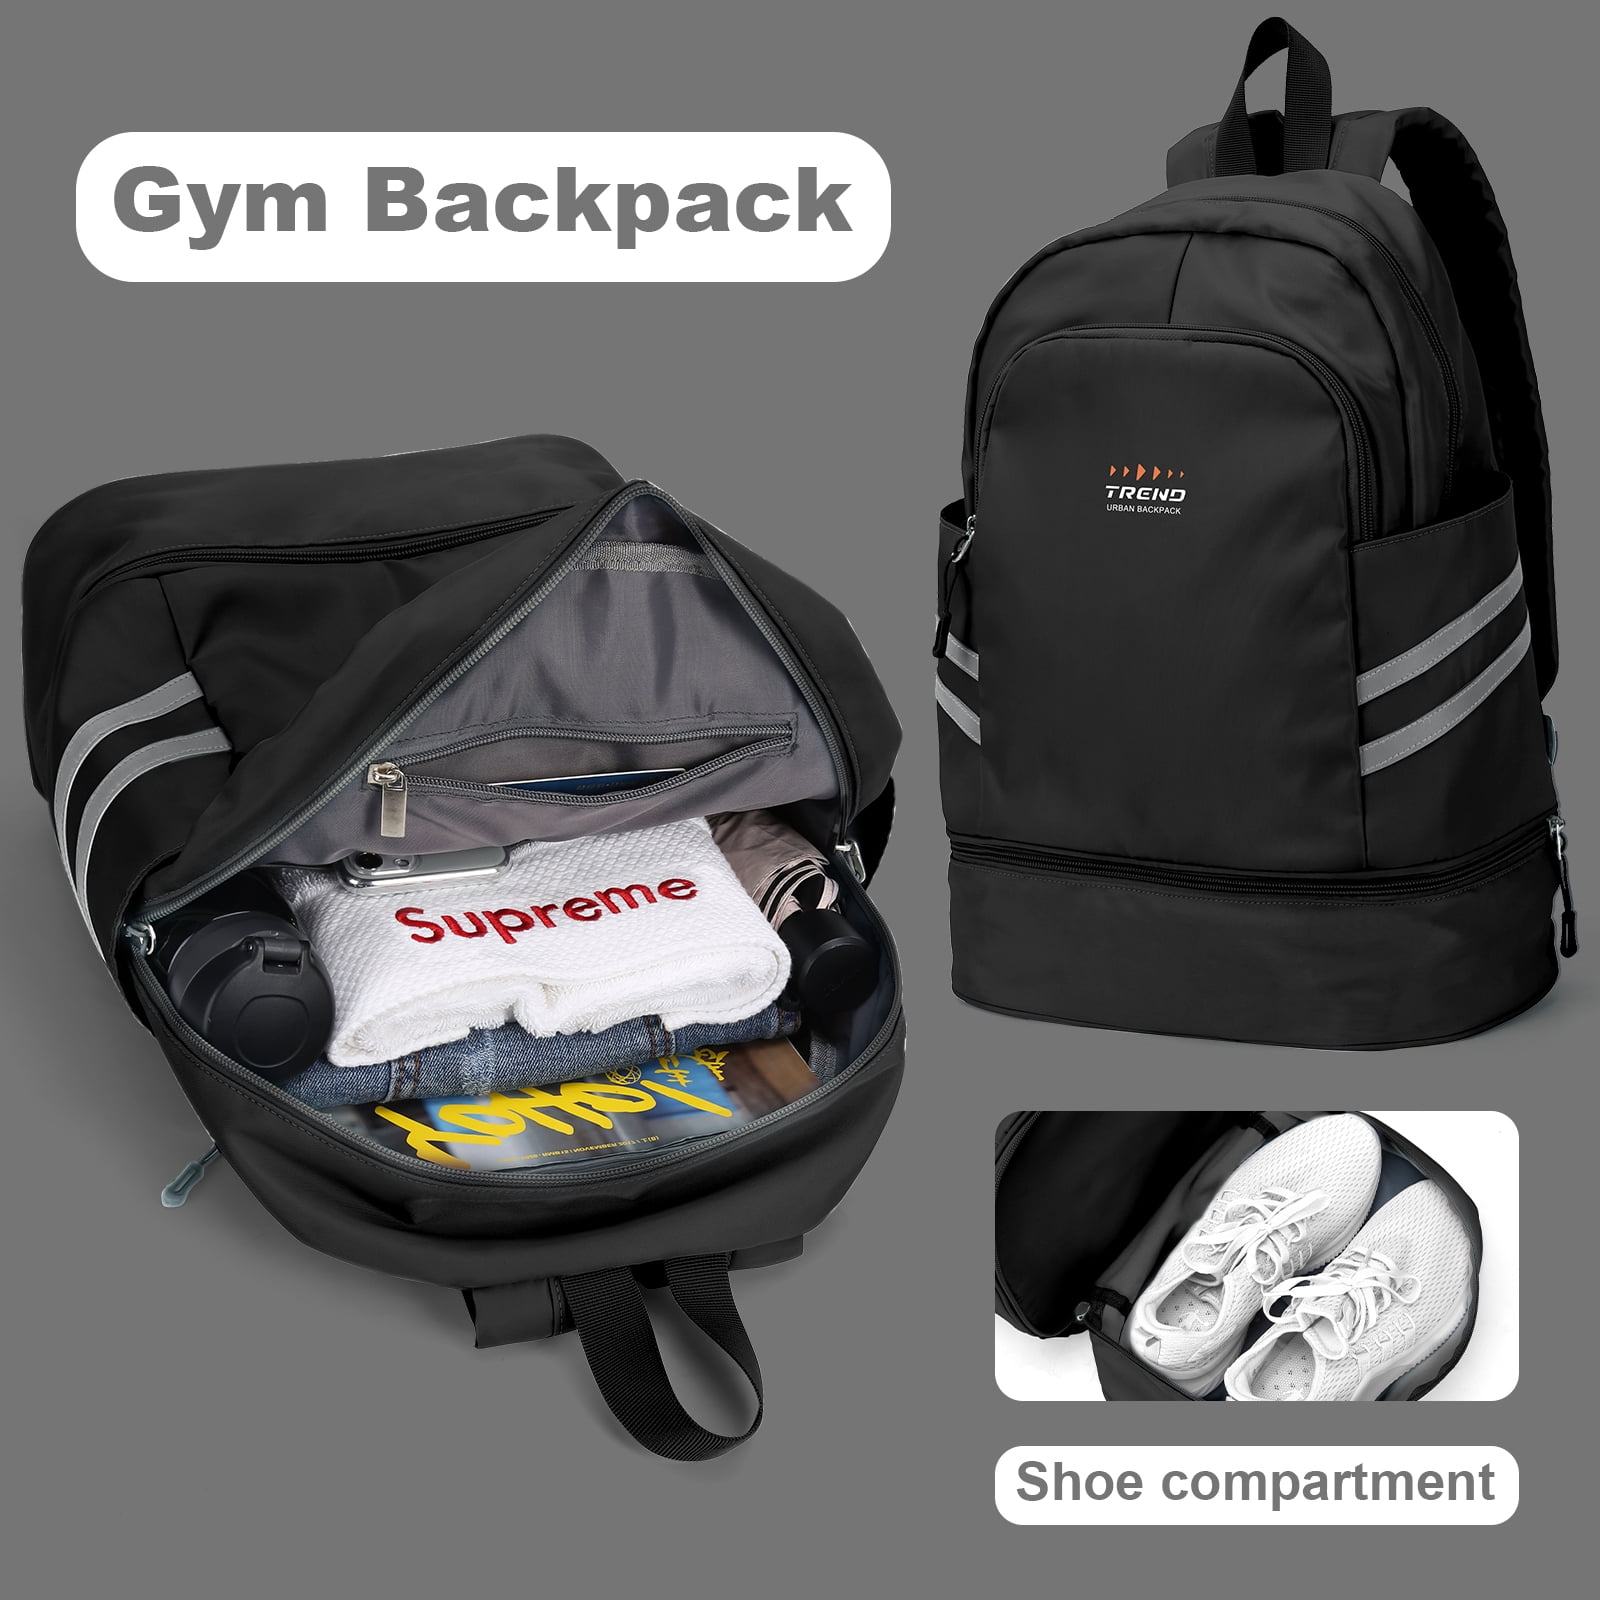 Gym Backpack For Women Men Waterproof Backpack With Shoe Compartment  Lightweight Travel Backpack Sports Backpack Small Gym Bag Black 